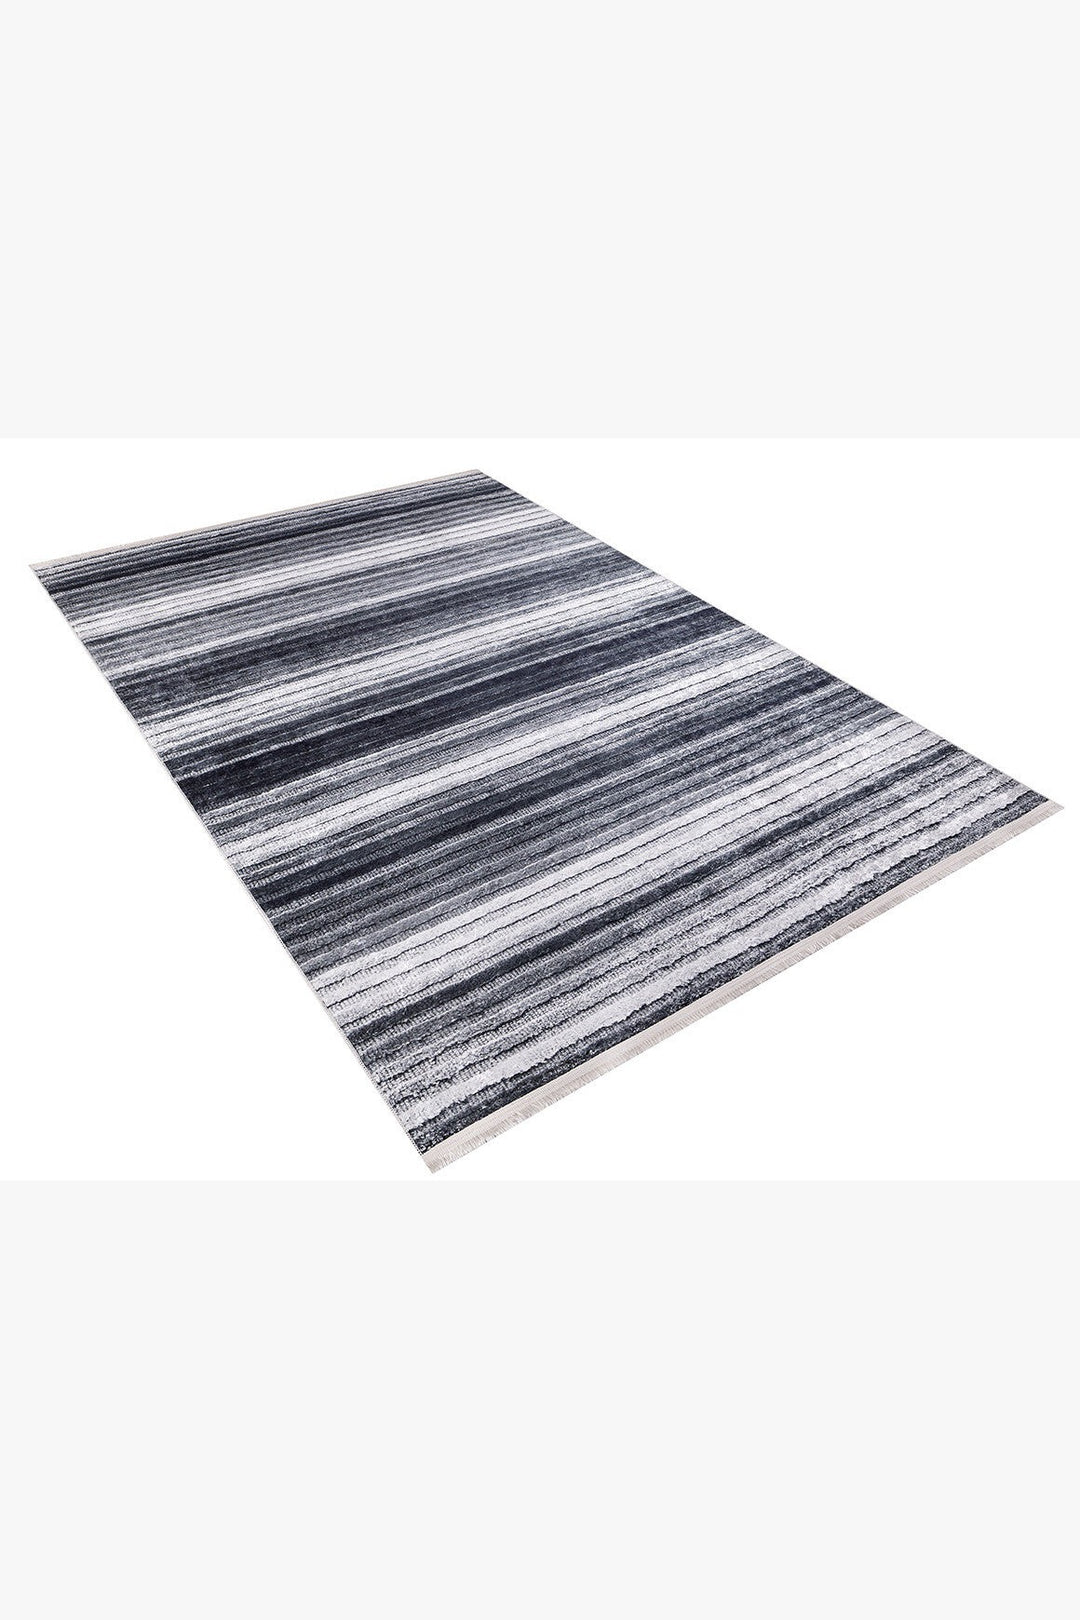 machine-washable-area-rug-Stripe-Modern-Collection-Gray-Anthracite-JR1125